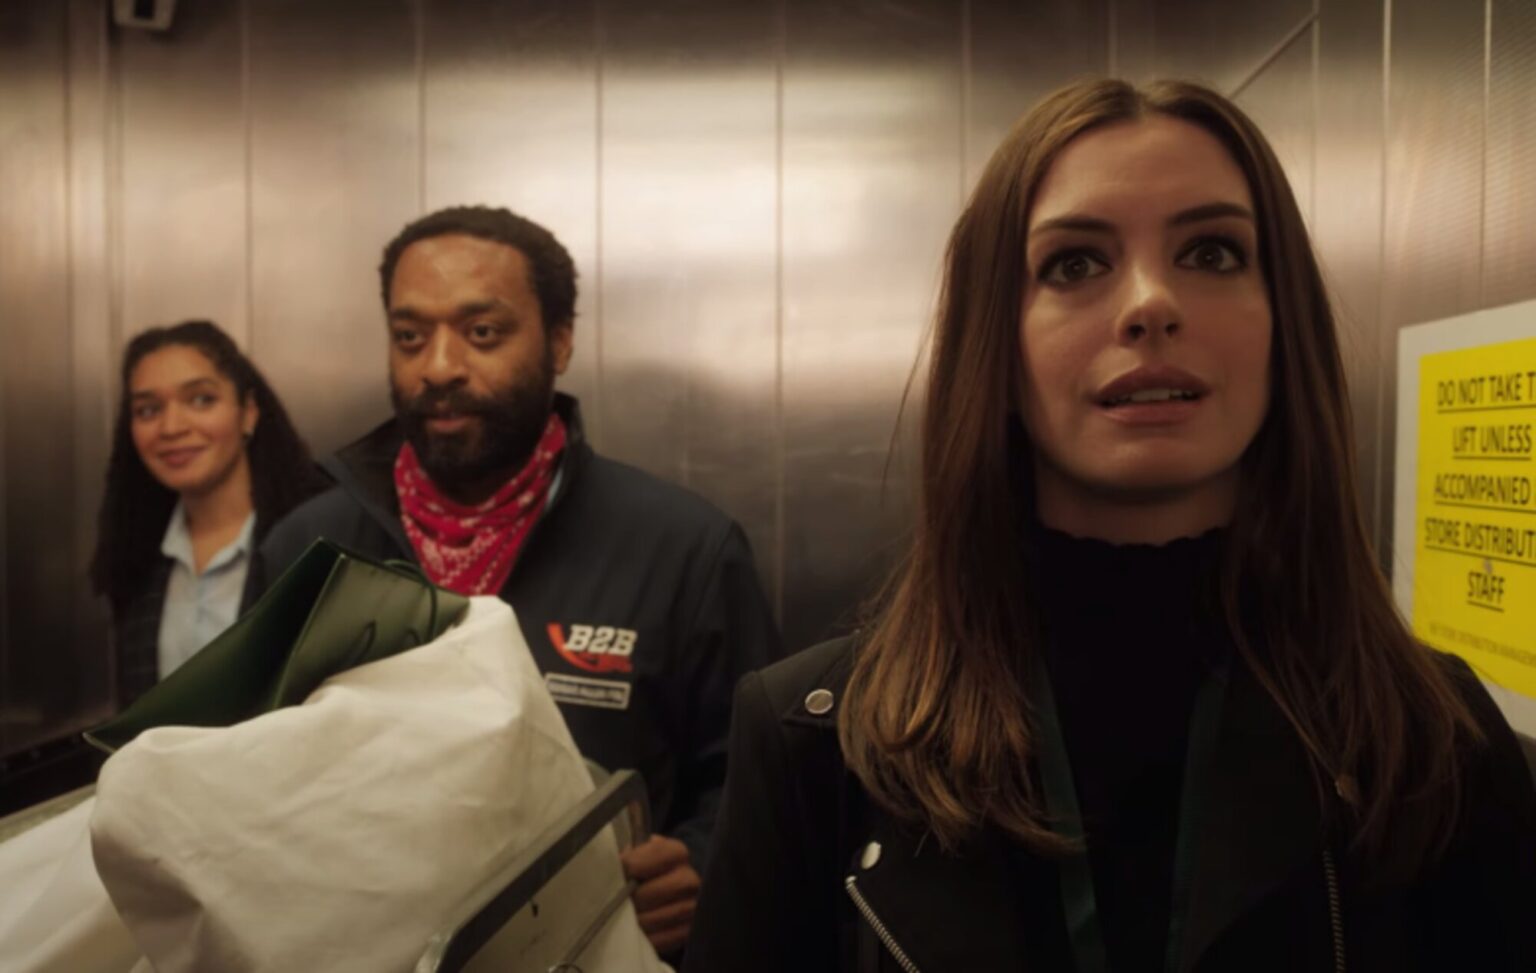 'Locked Down' takes place during the pandemic and features well-loved actors like Anne Hathaway. Here's everything to know about the heist movie.